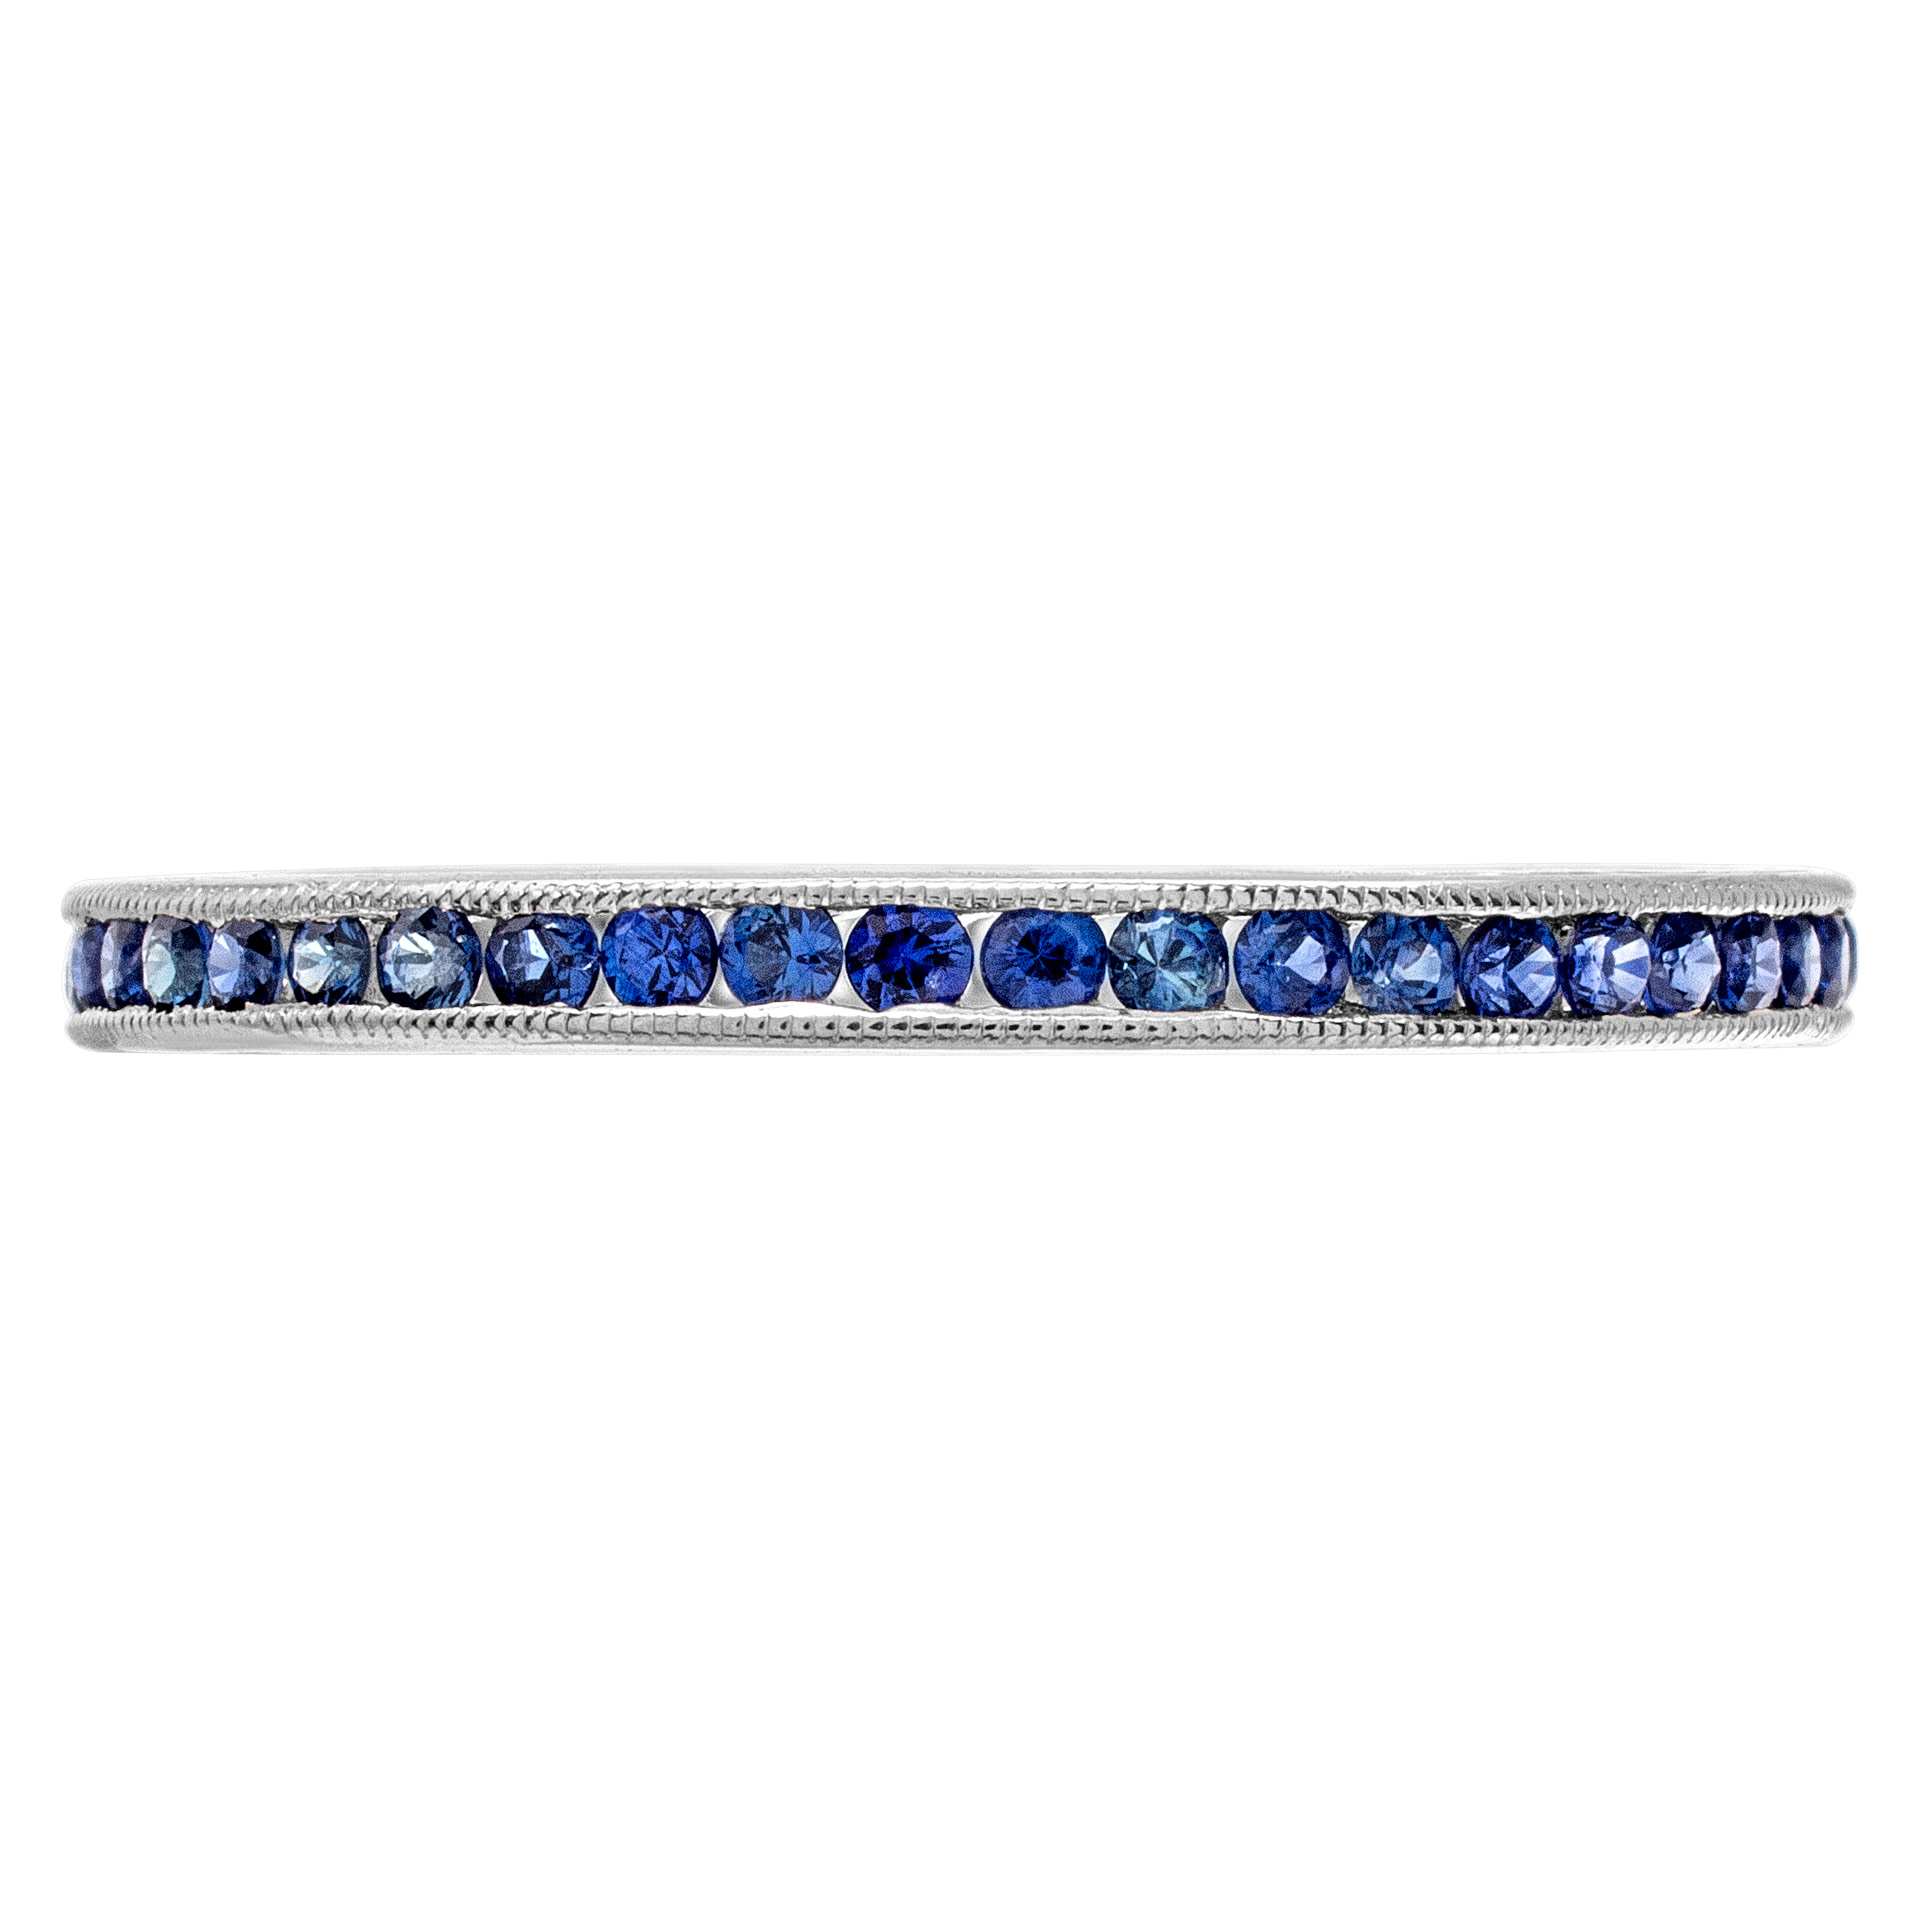 18k white gold eternity band with blue sapphires. image 1